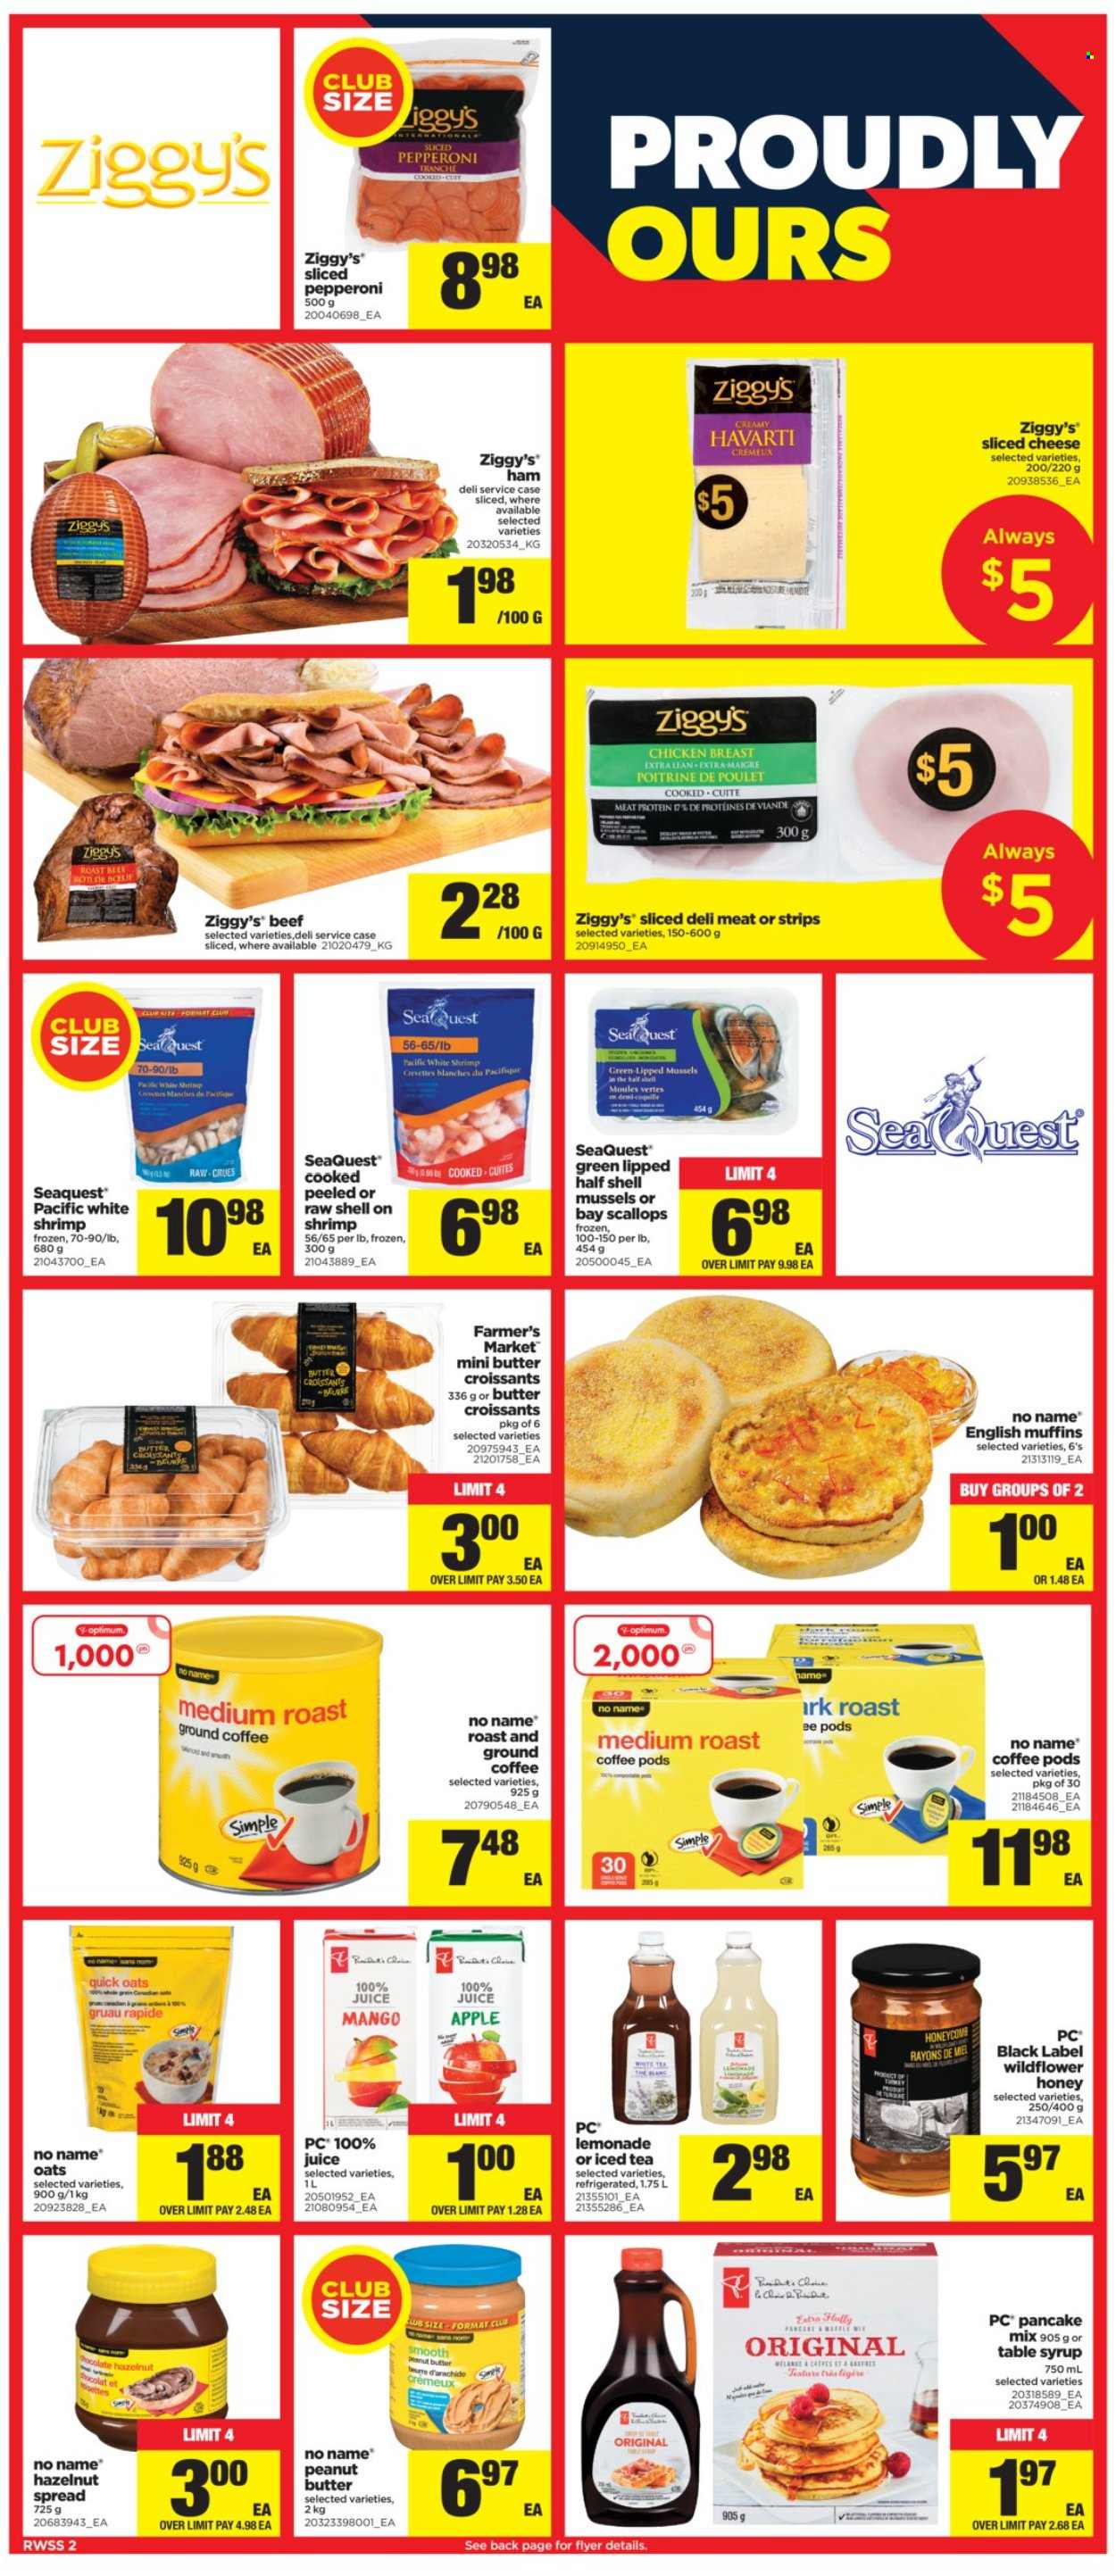 thumbnail - Real Canadian Superstore Flyer - September 10, 2021 - September 16, 2021 - Sales products - Apple, english muffins, croissant, mango, mussels, scallops, shrimps, No Name, pancakes, ham, pepperoni, sliced cheese, Havarti, cheese, strips, oats, Quick Oats, honey, peanut butter, syrup, hazelnut spread, lemonade, juice, ice tea, coffee pods, ground coffee, chicken breasts, chicken, Optimum, table. Page 2.